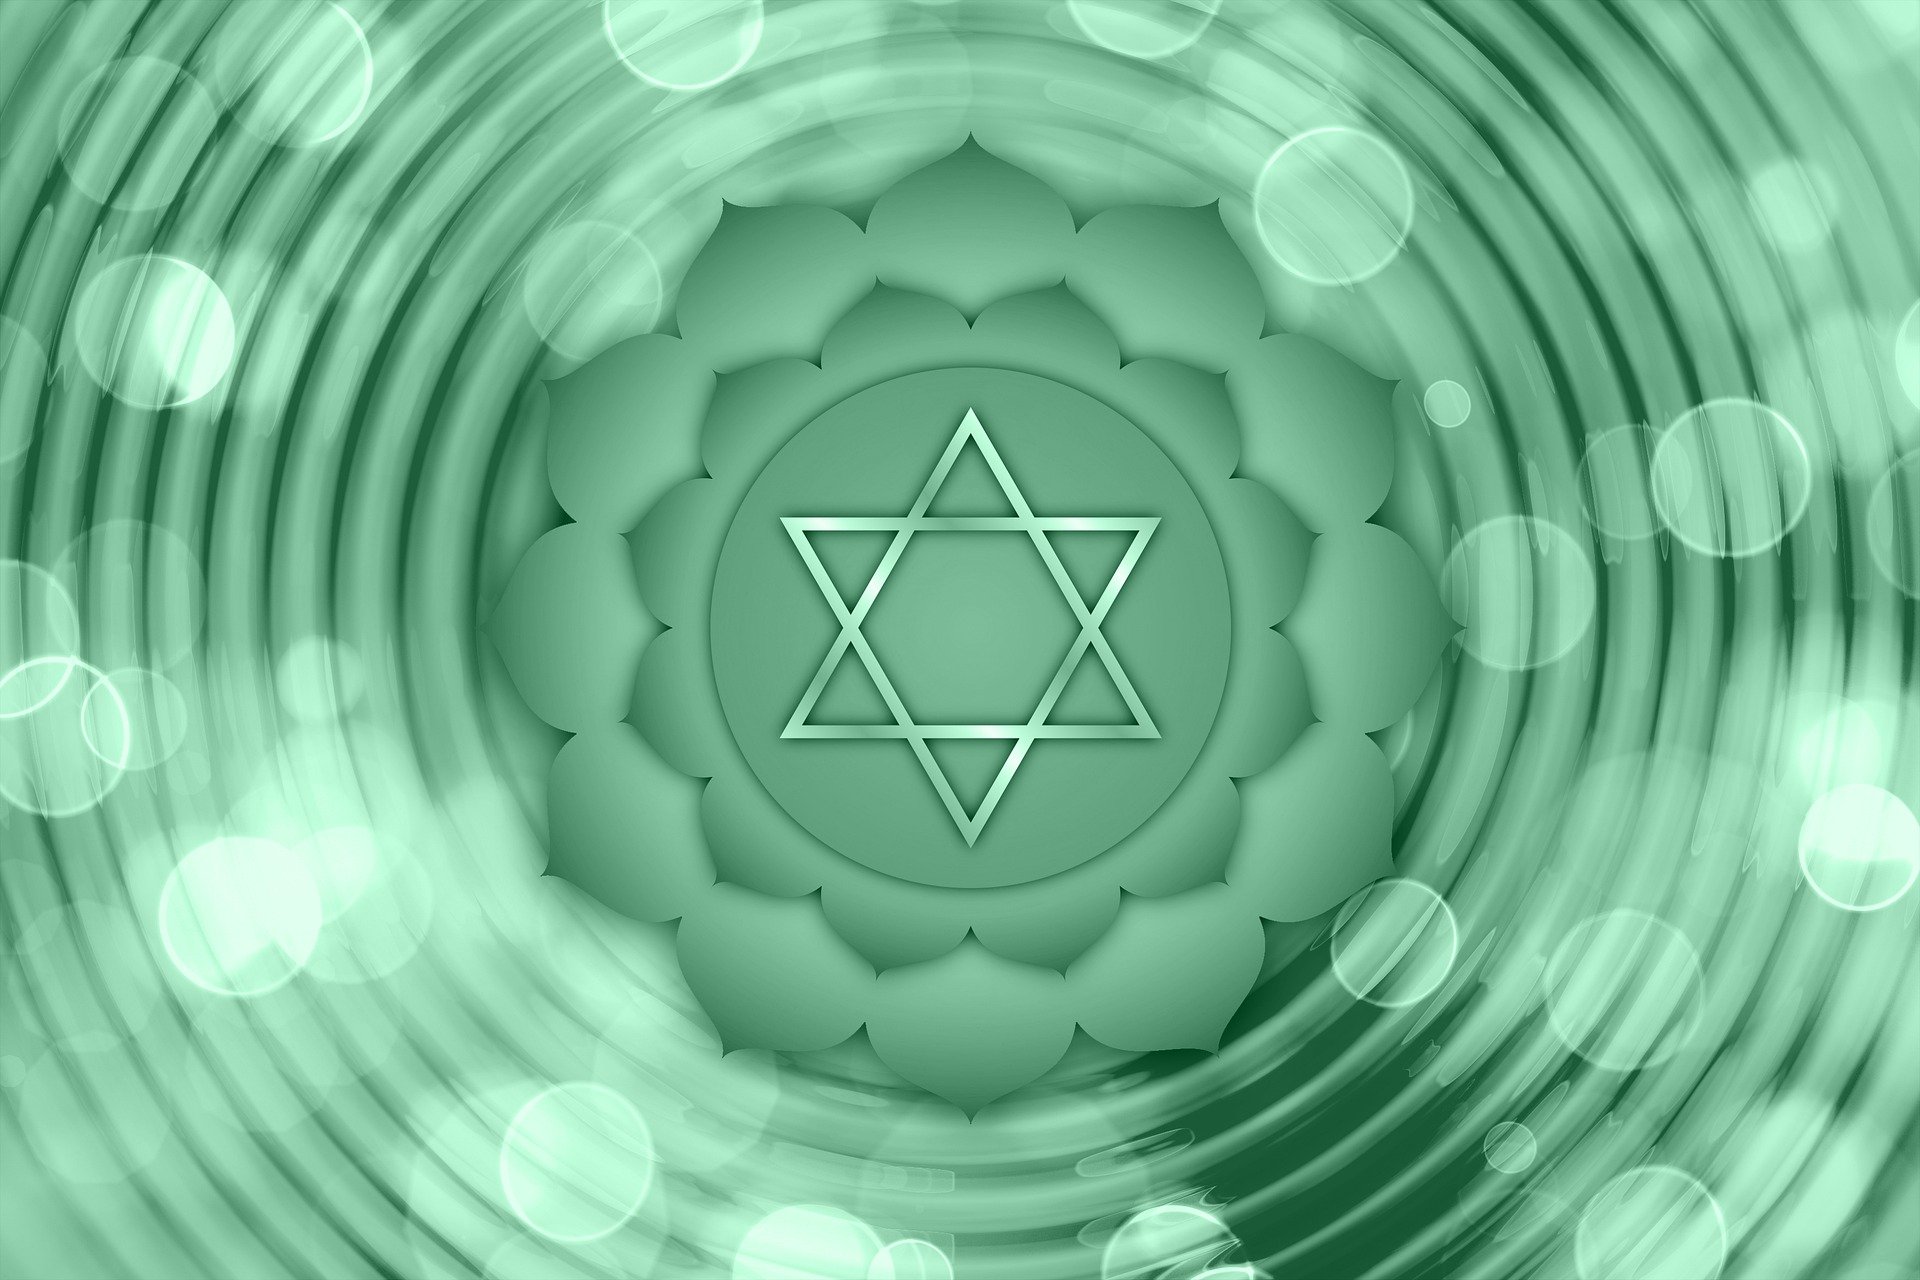 An illustration of the 4th chakra with 12 petals and two sets of triangles.